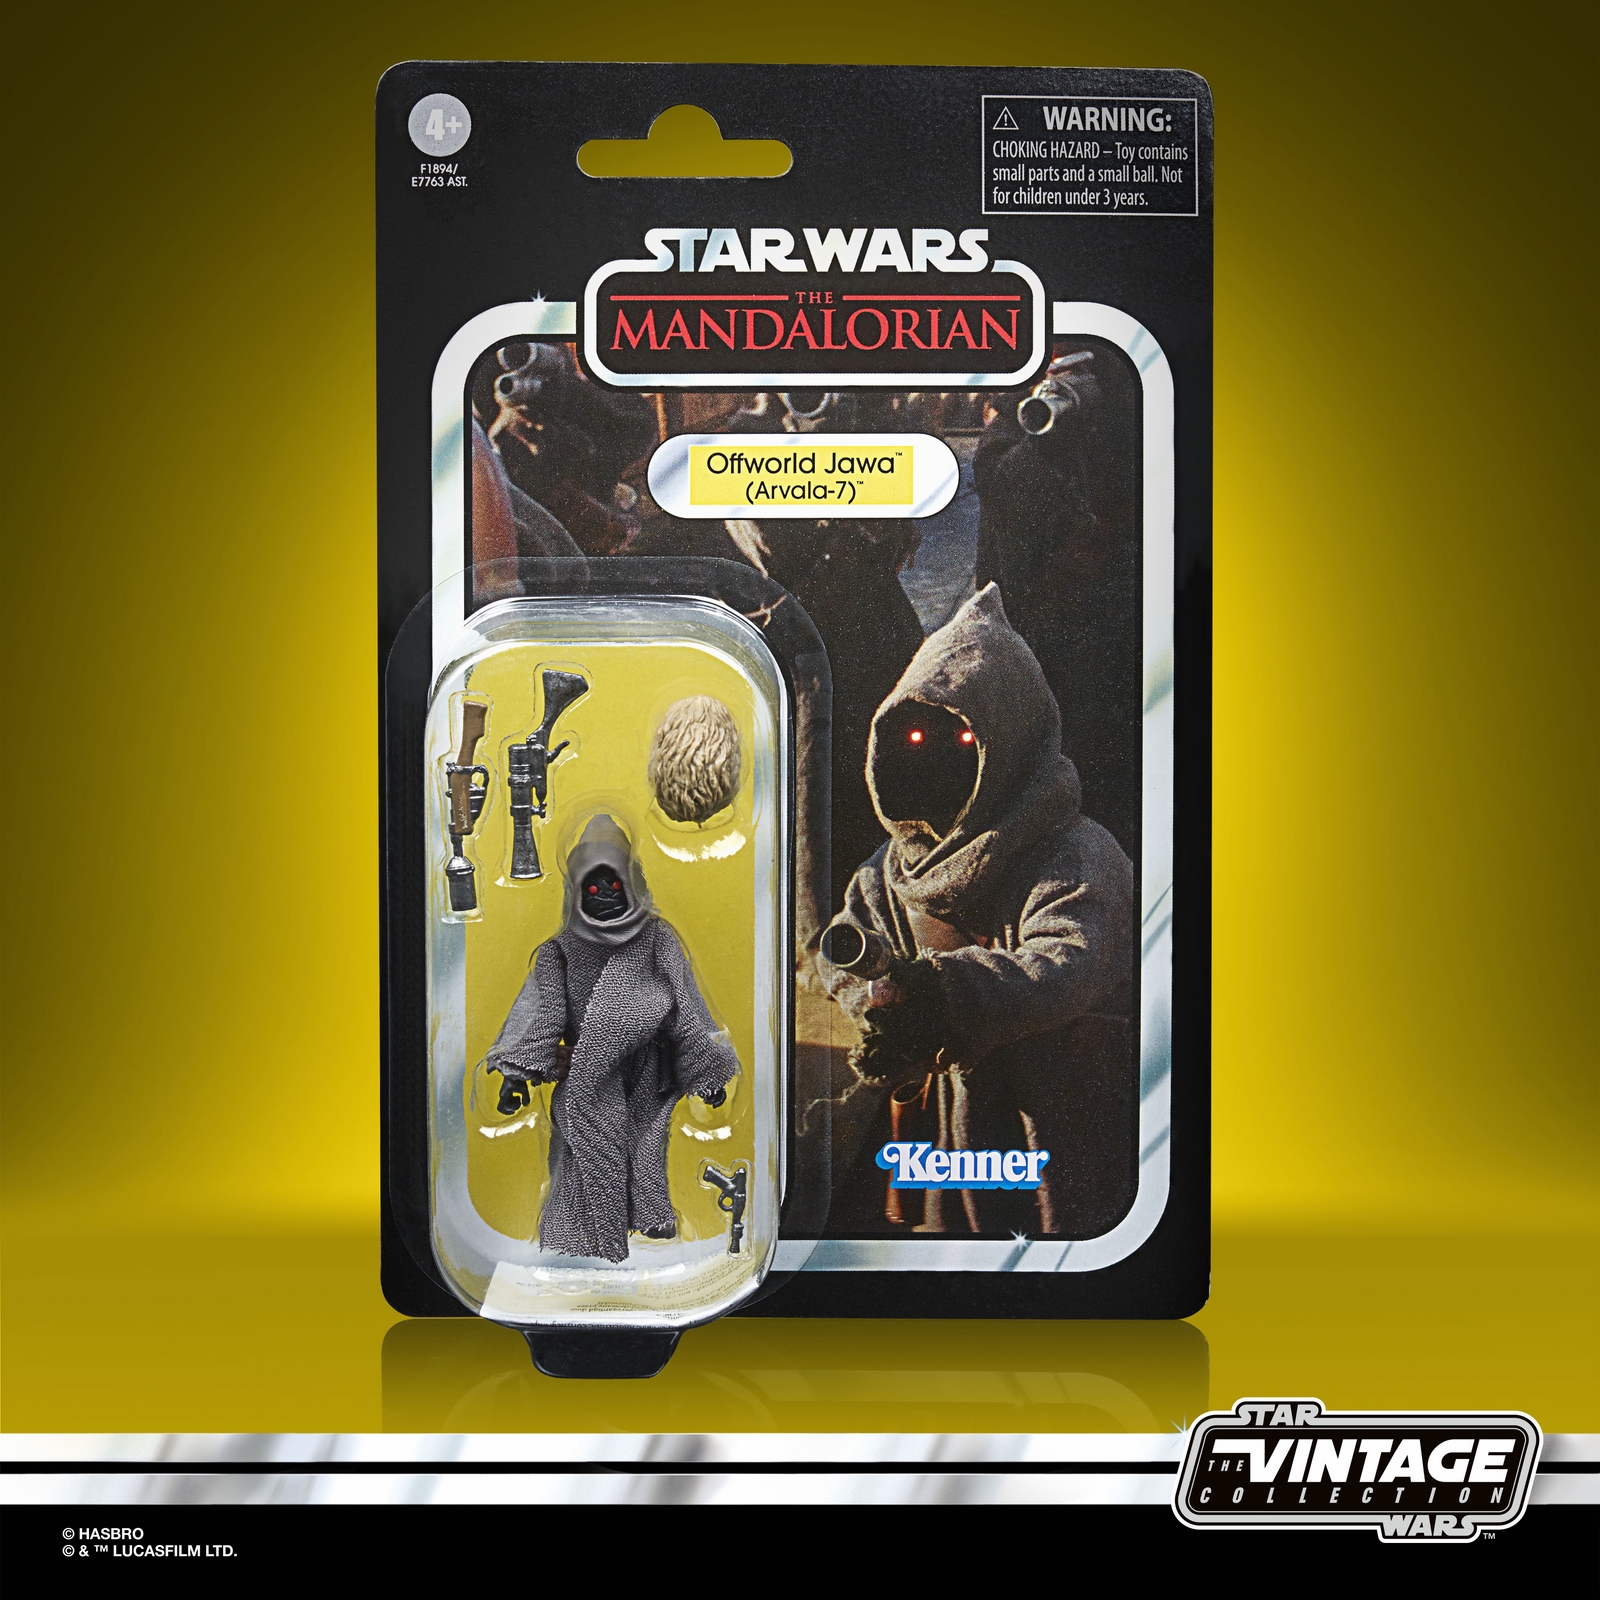 STAR WARS THE VINTAGE COLLECTION 3.75-INCH OFFWORLD JAWA (ARVALA-7) Figure  - in pck.jpg